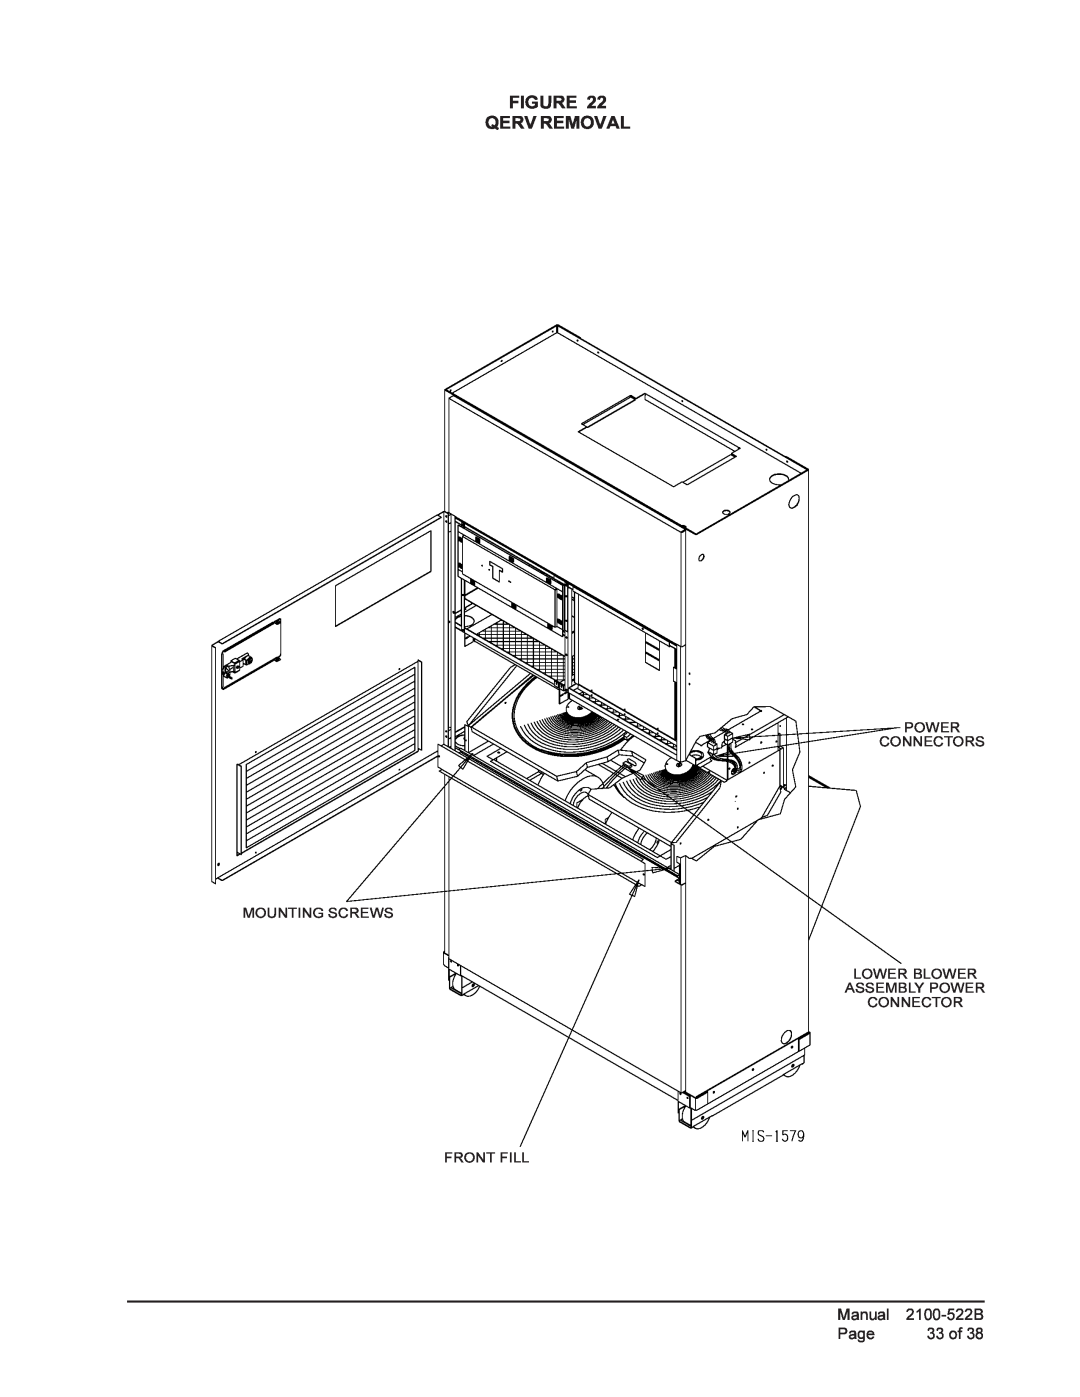 Bard Q60A1, Q30A1, Q36A1, Q42A1, Q24A1, Q48A1 installation instructions Figure Qerv Removal, Manual, Page, 33 of 